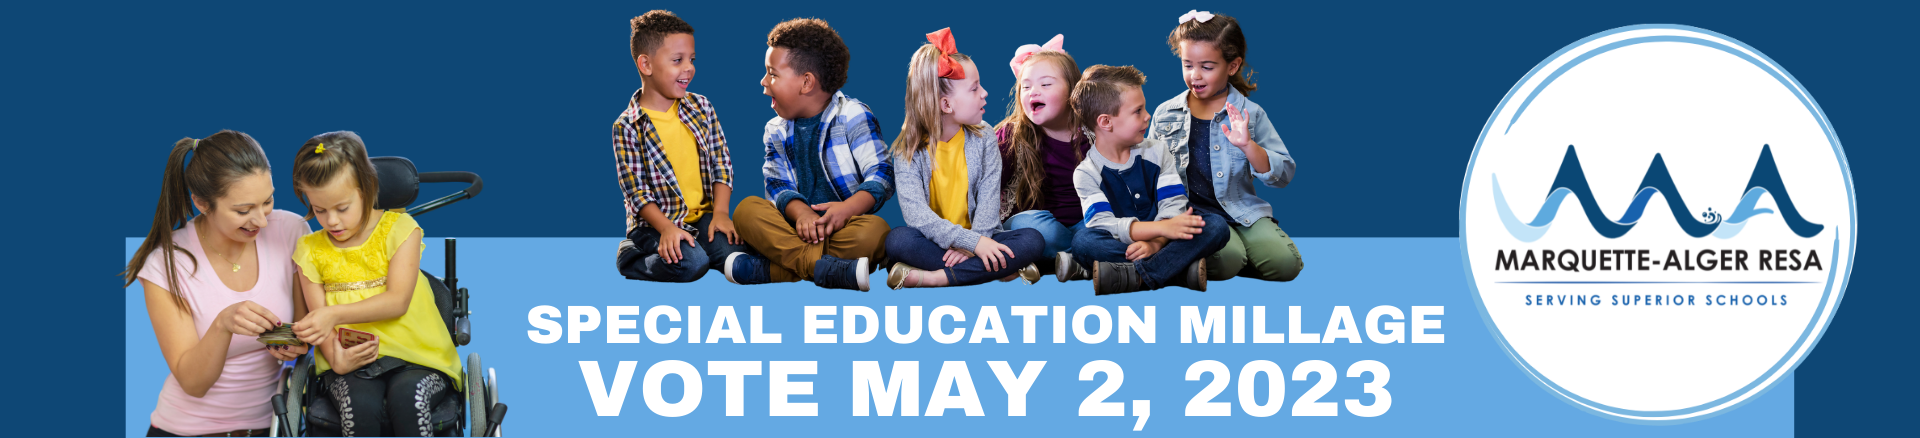 Special Education Millage, VOTE May 2, 2023